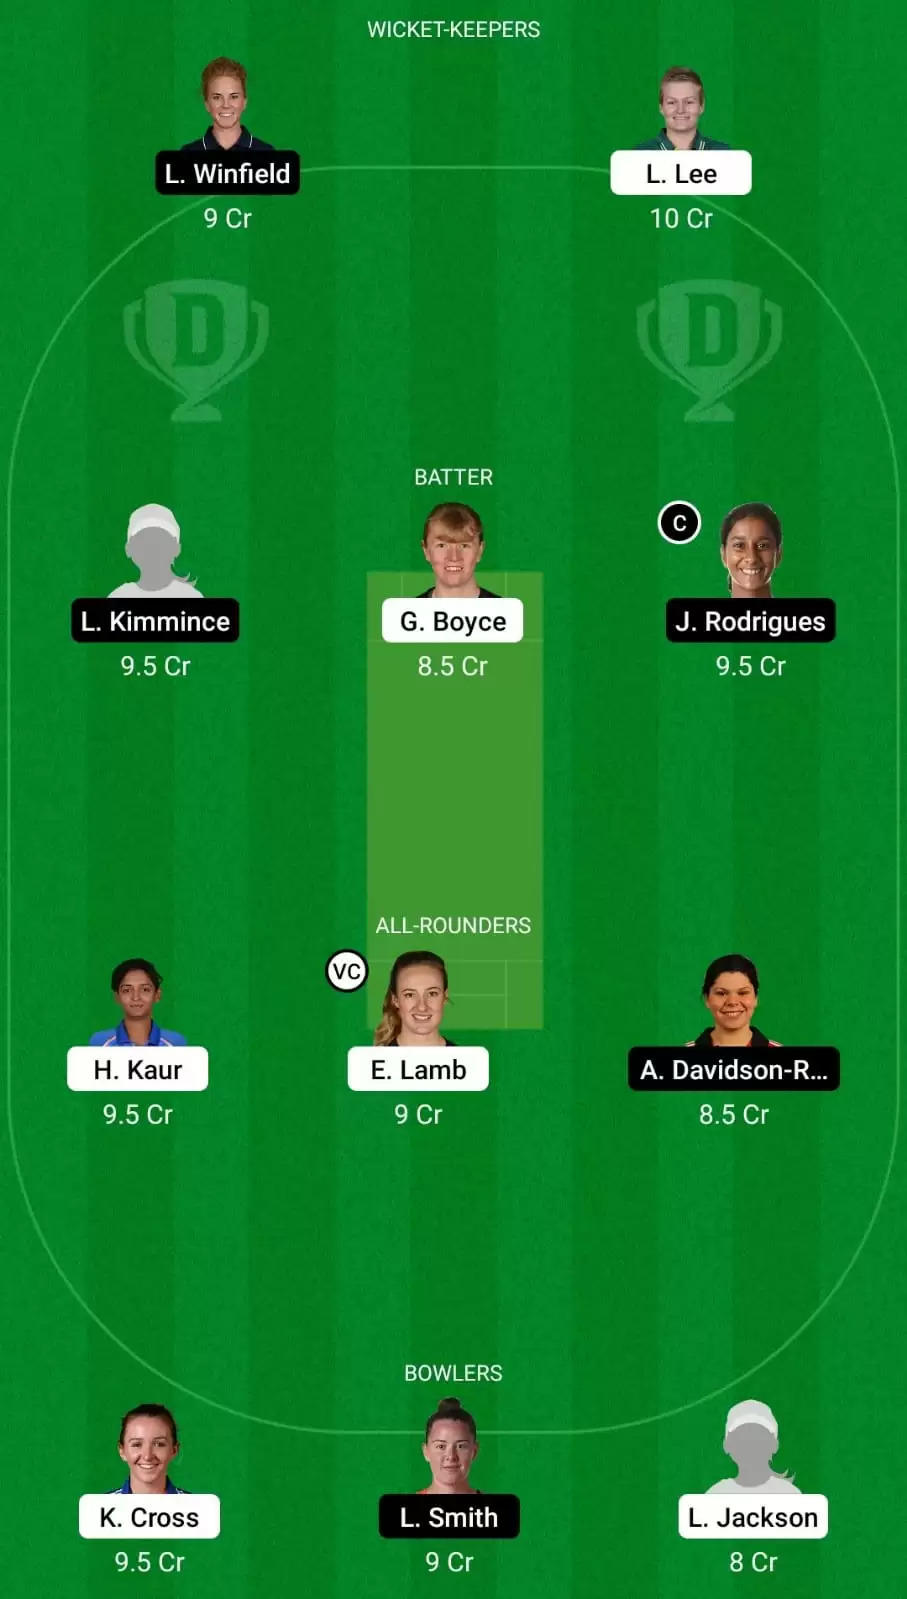 MNR-W vs NOS-W Dream11 Team Prediction for The Hundred Women’s 2021: Manchester Originals Women vs Northern Superchargers Women Preview